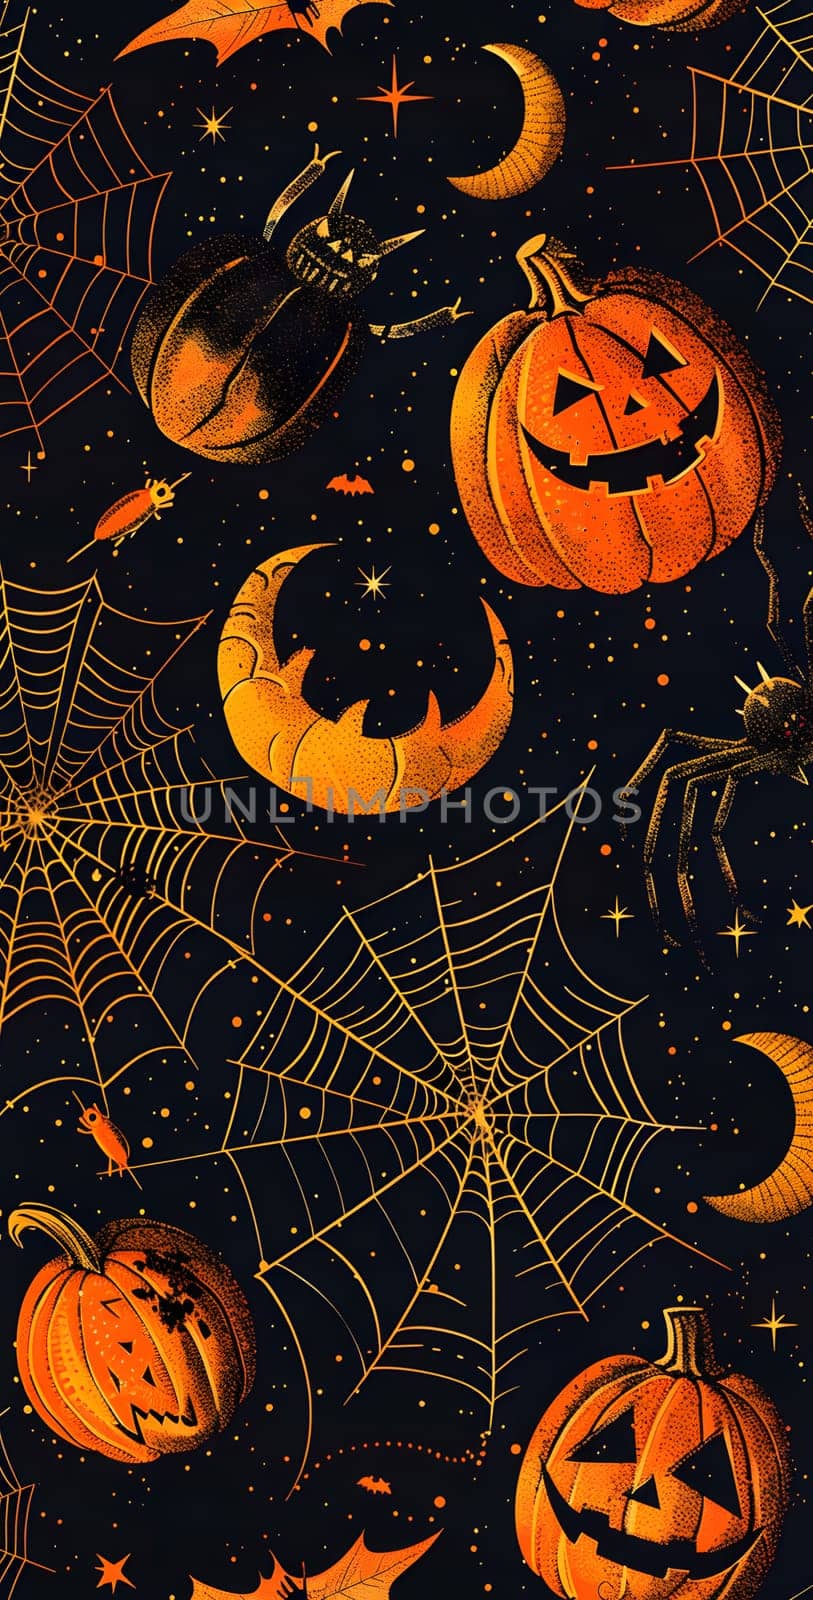 Get into the Halloween spirit with a creative arts wallpaper featuring orange pumpkins, spooky bats, crescent moons, and intricate spider webs. Perfect for the season of Calabaza and Cucurbita